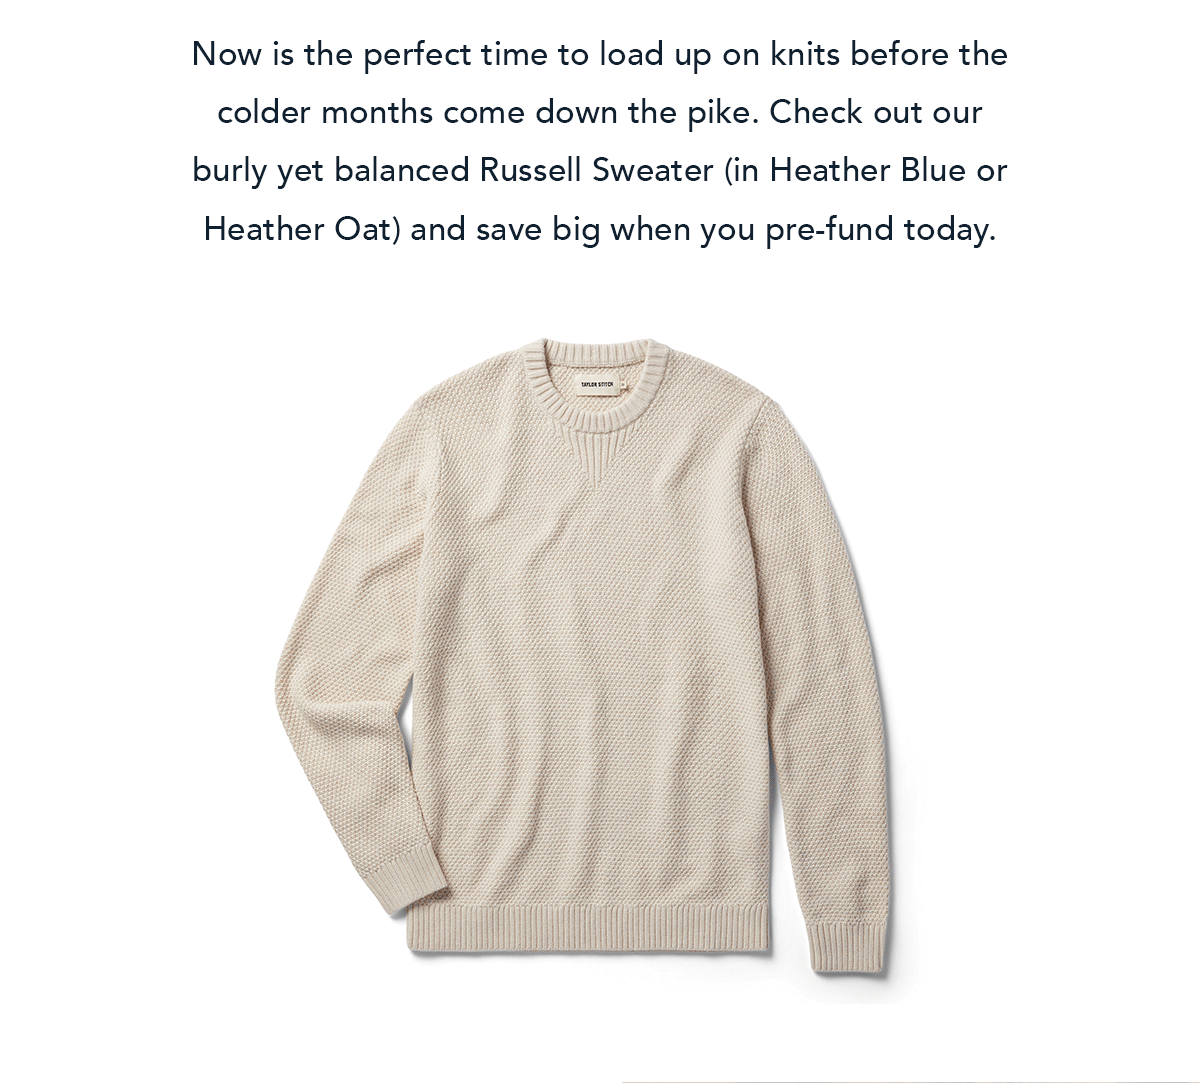 Now is the perfect time to load up on knits before the colder months come down the pike. Check out our burly yet balanced Russell Sweater (in Heather Blue or Heather Oat) and save big when you pre-fund today.